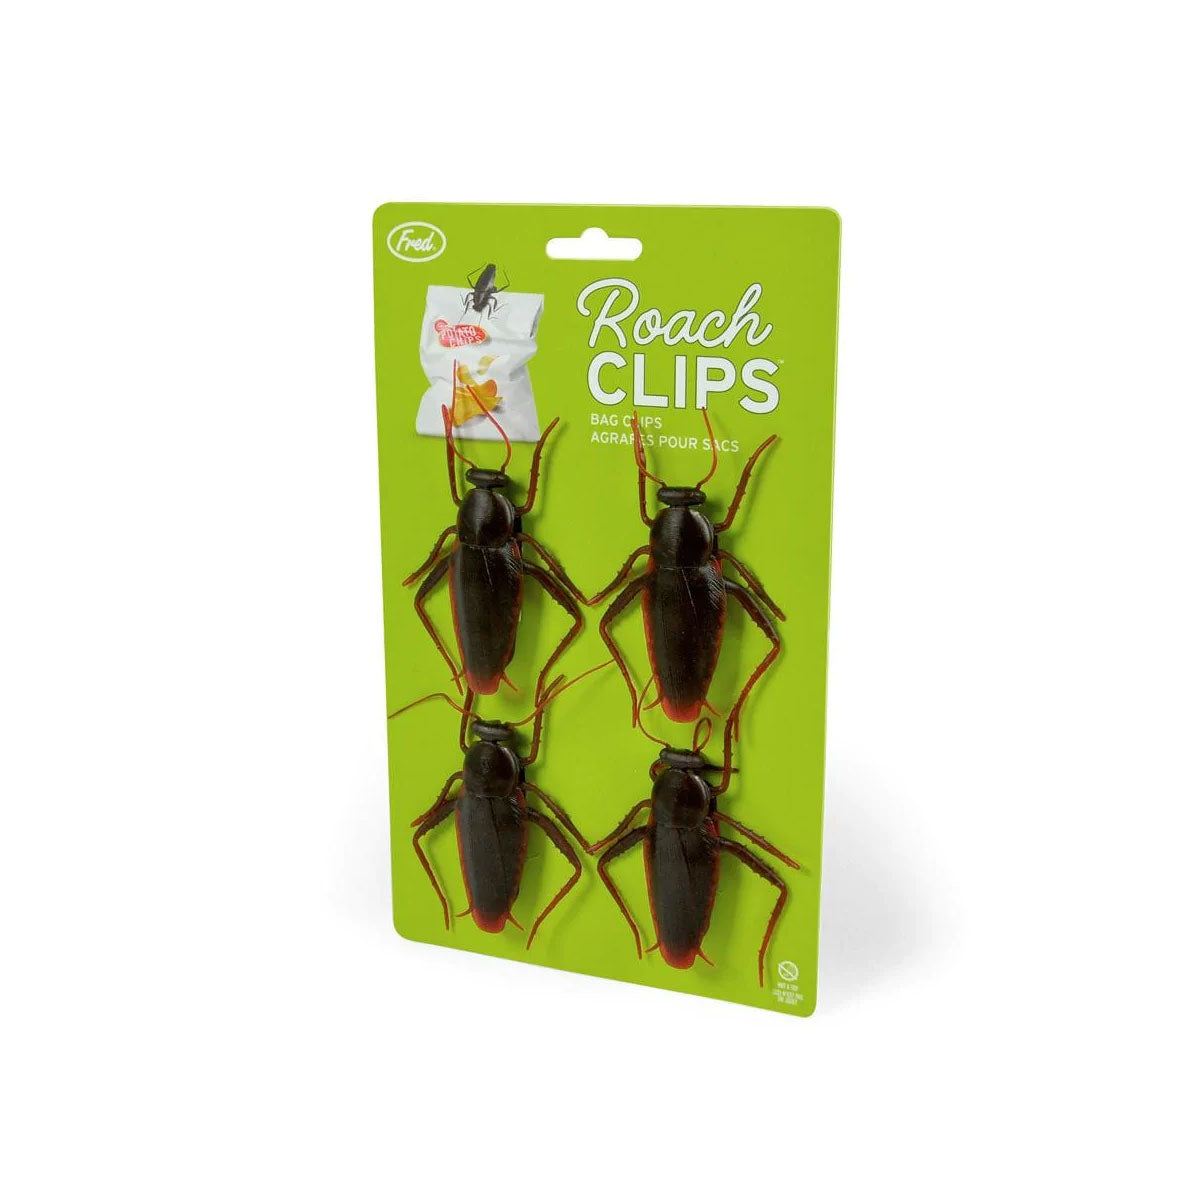 Fred Roach Clips Chip Bag Clips